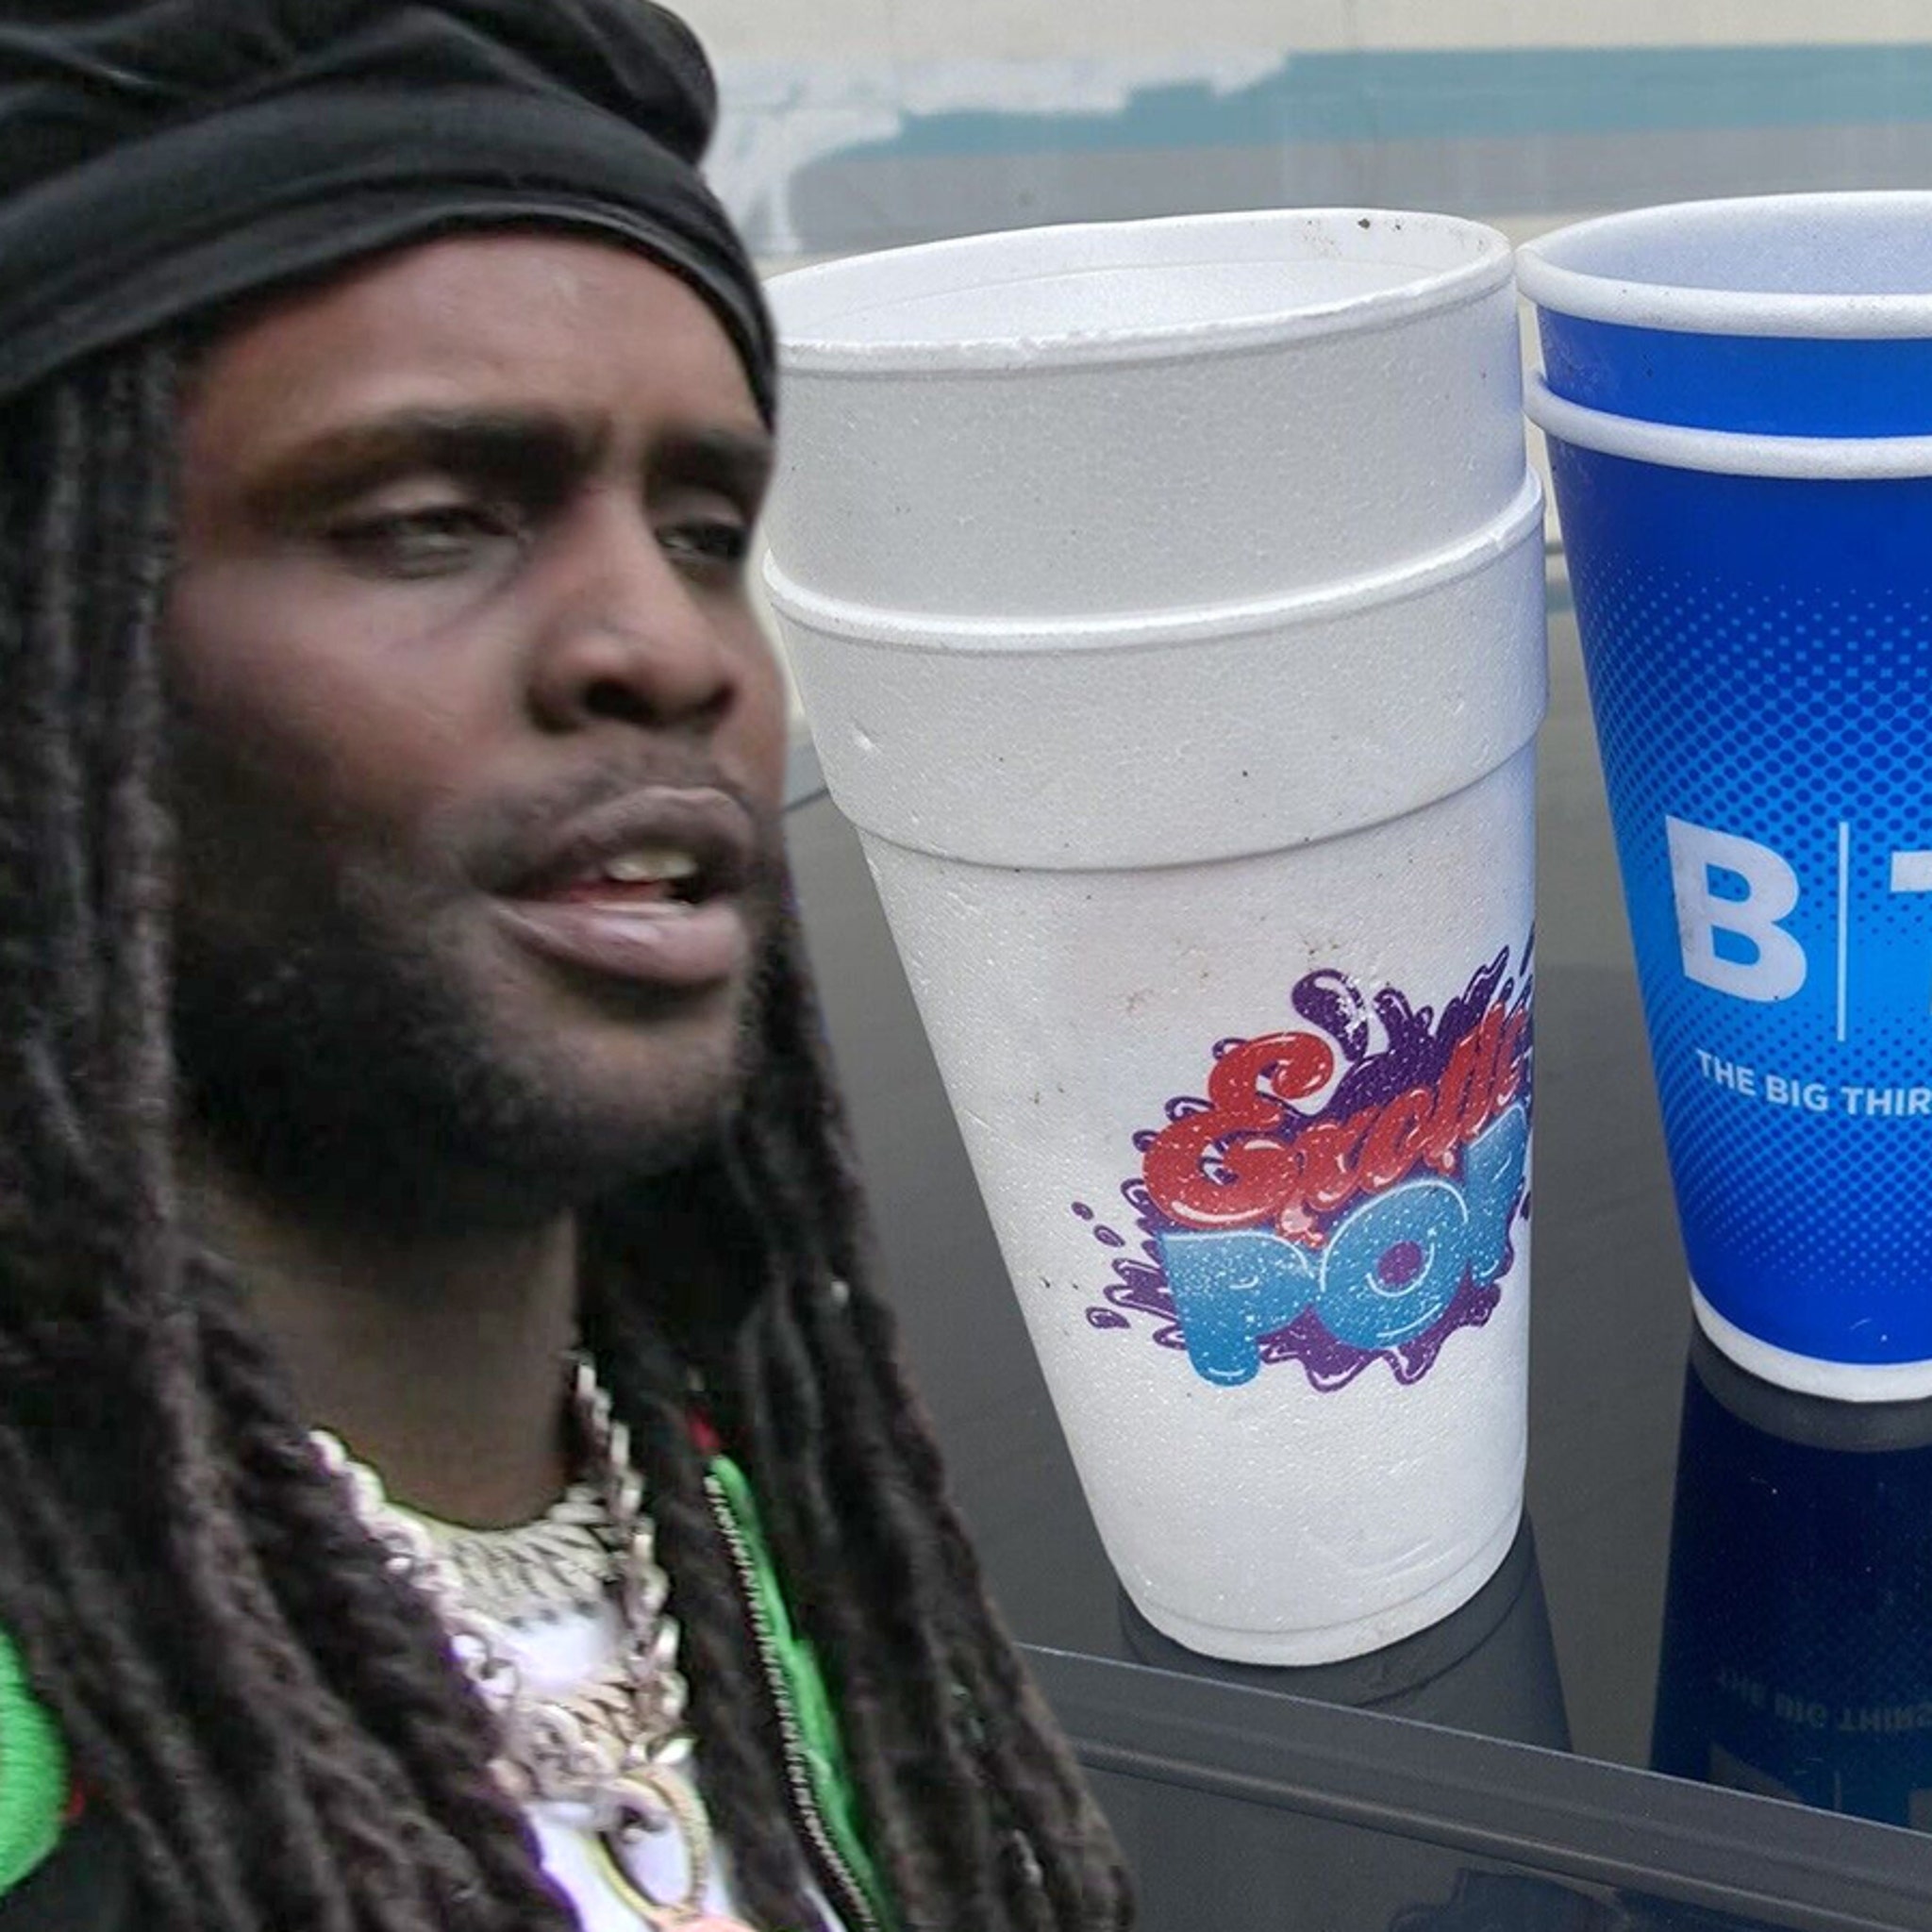 SipLean / Exotic Pop Styrofoam Cups New / never used for sippin Chief Keef